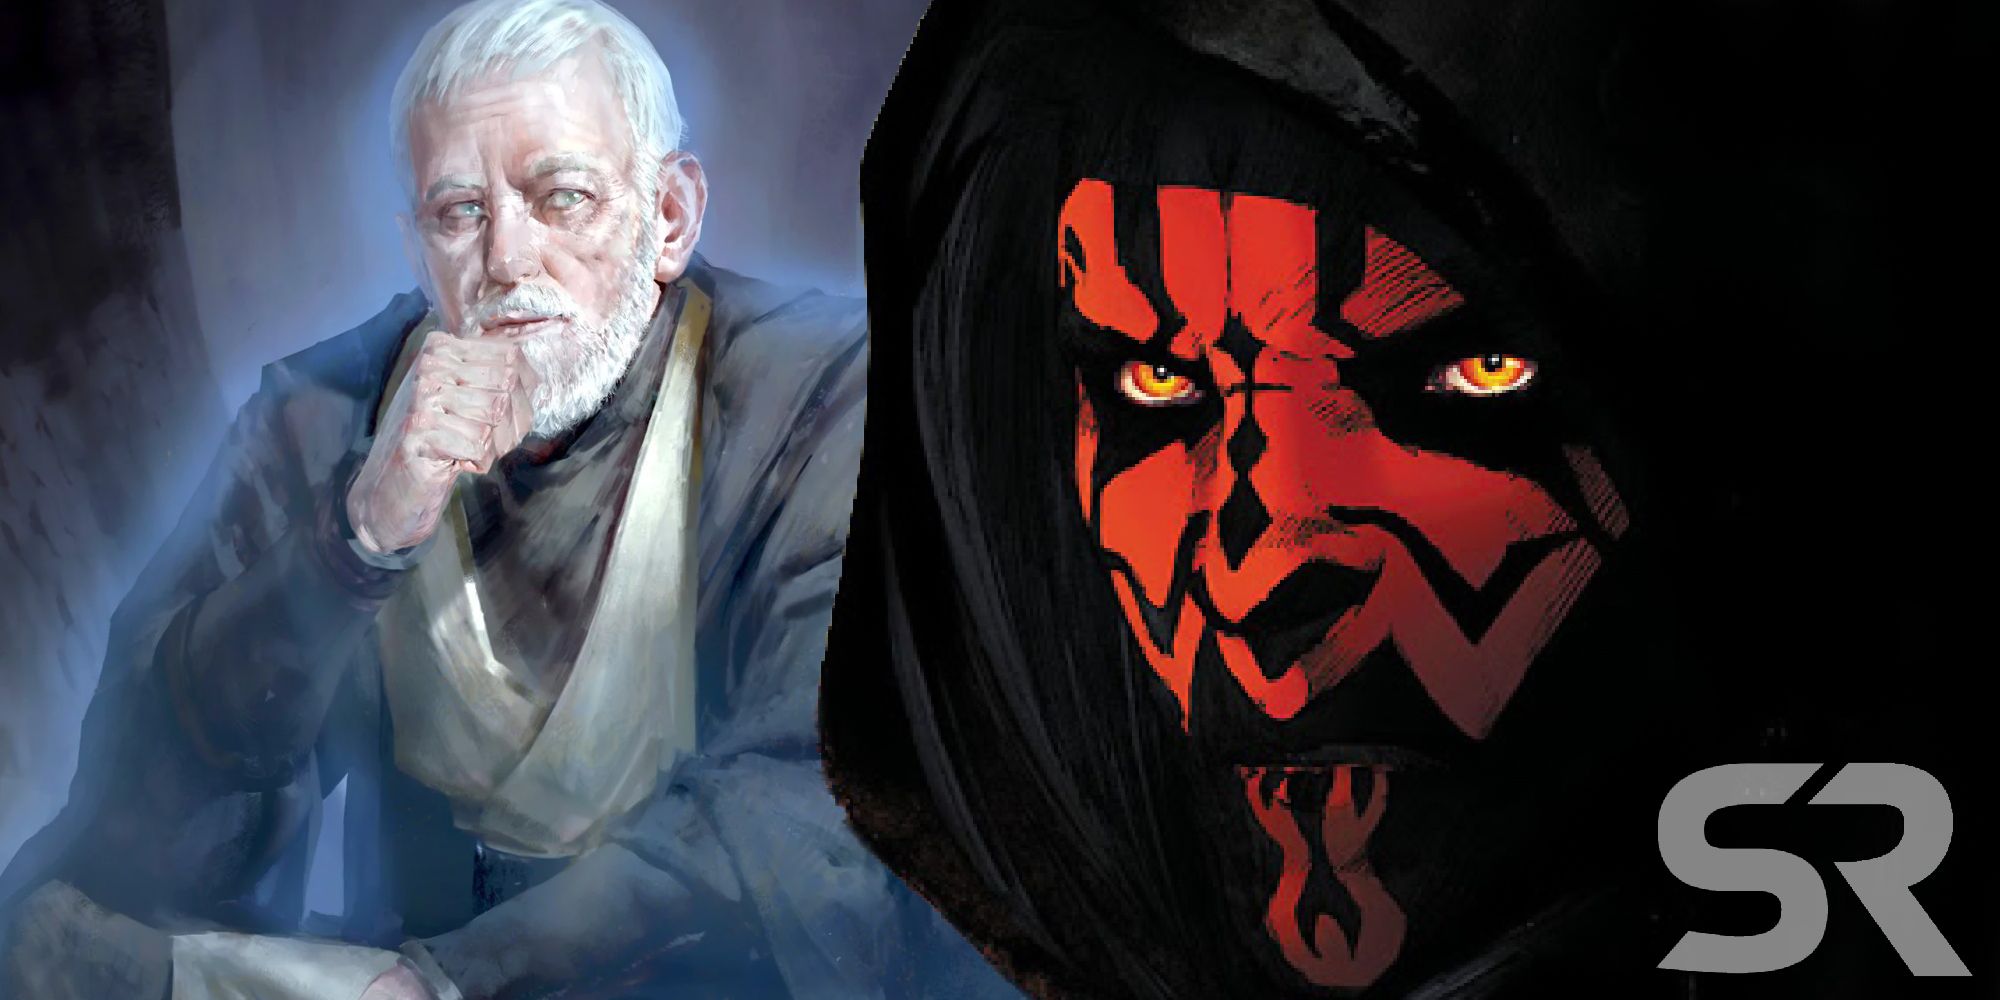 Star Wars: The Sith May Be Able To Capture Force Ghosts